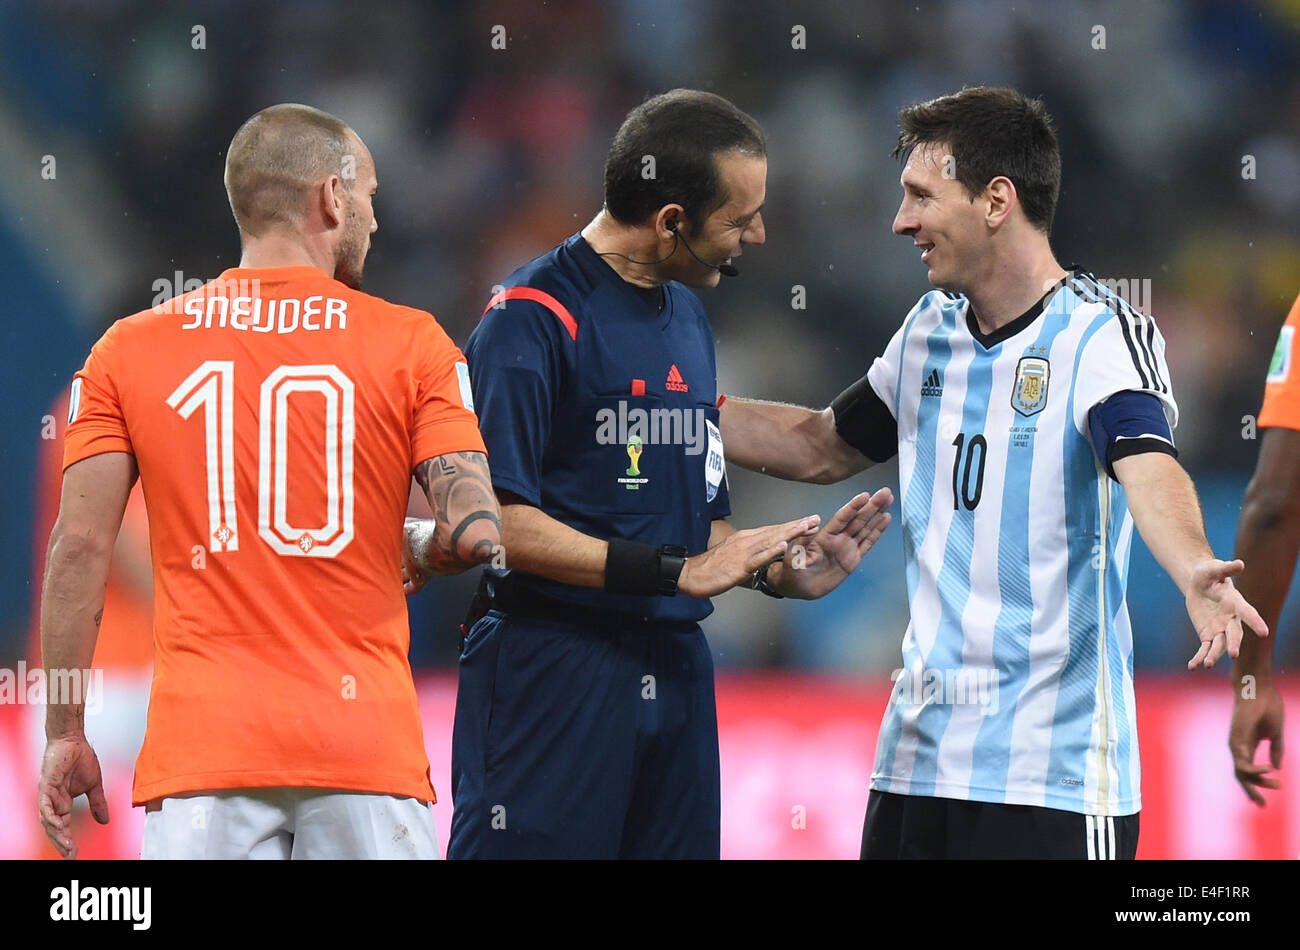 Sao Paulo, Brazil. 09th July, 2014. Turkish referee Cuneyt Cakir (C) talks to Argentina's Lionel Mesi (R) and Wesley Sneijder (L) of the Netherlands during the FIFA World Cup 2014 semi-final soccer match between the Netherlands and Argentina at the Arena Corinthians in Sao Paulo, Brazil, 09 July 2014. Photo: Marius Becker/dpa/Alamy Live News Stock Photo